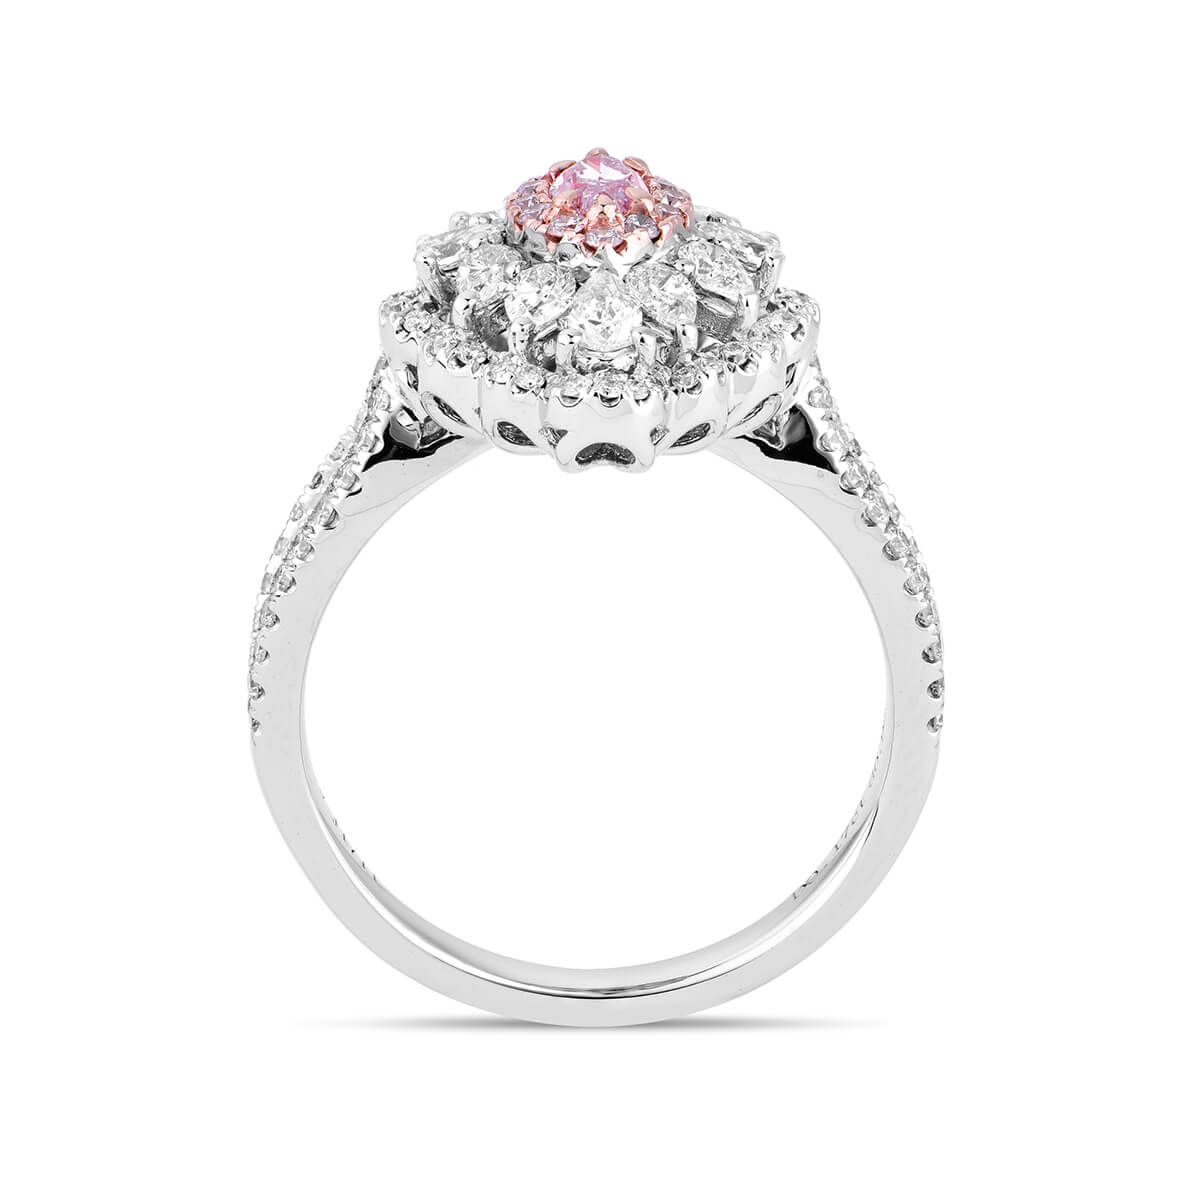 Light Pink Diamond Ring, 0.17 Ct. (1.15 Ct. TW), Marquise shape, GIA Certified, 5192255856